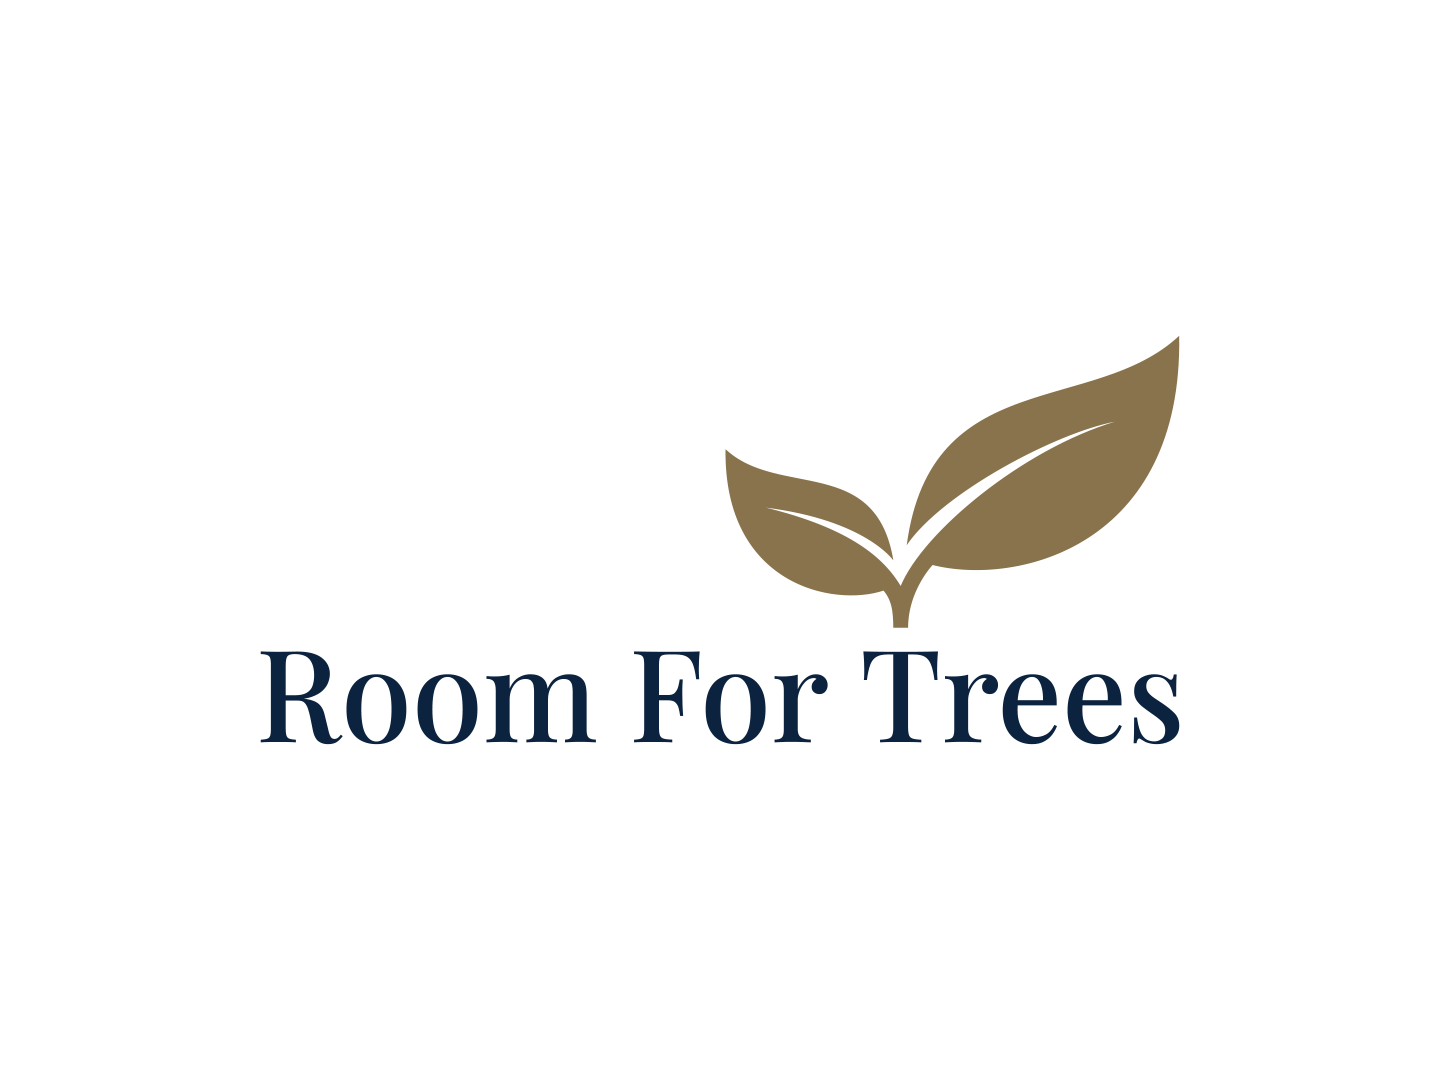 Room for Trees